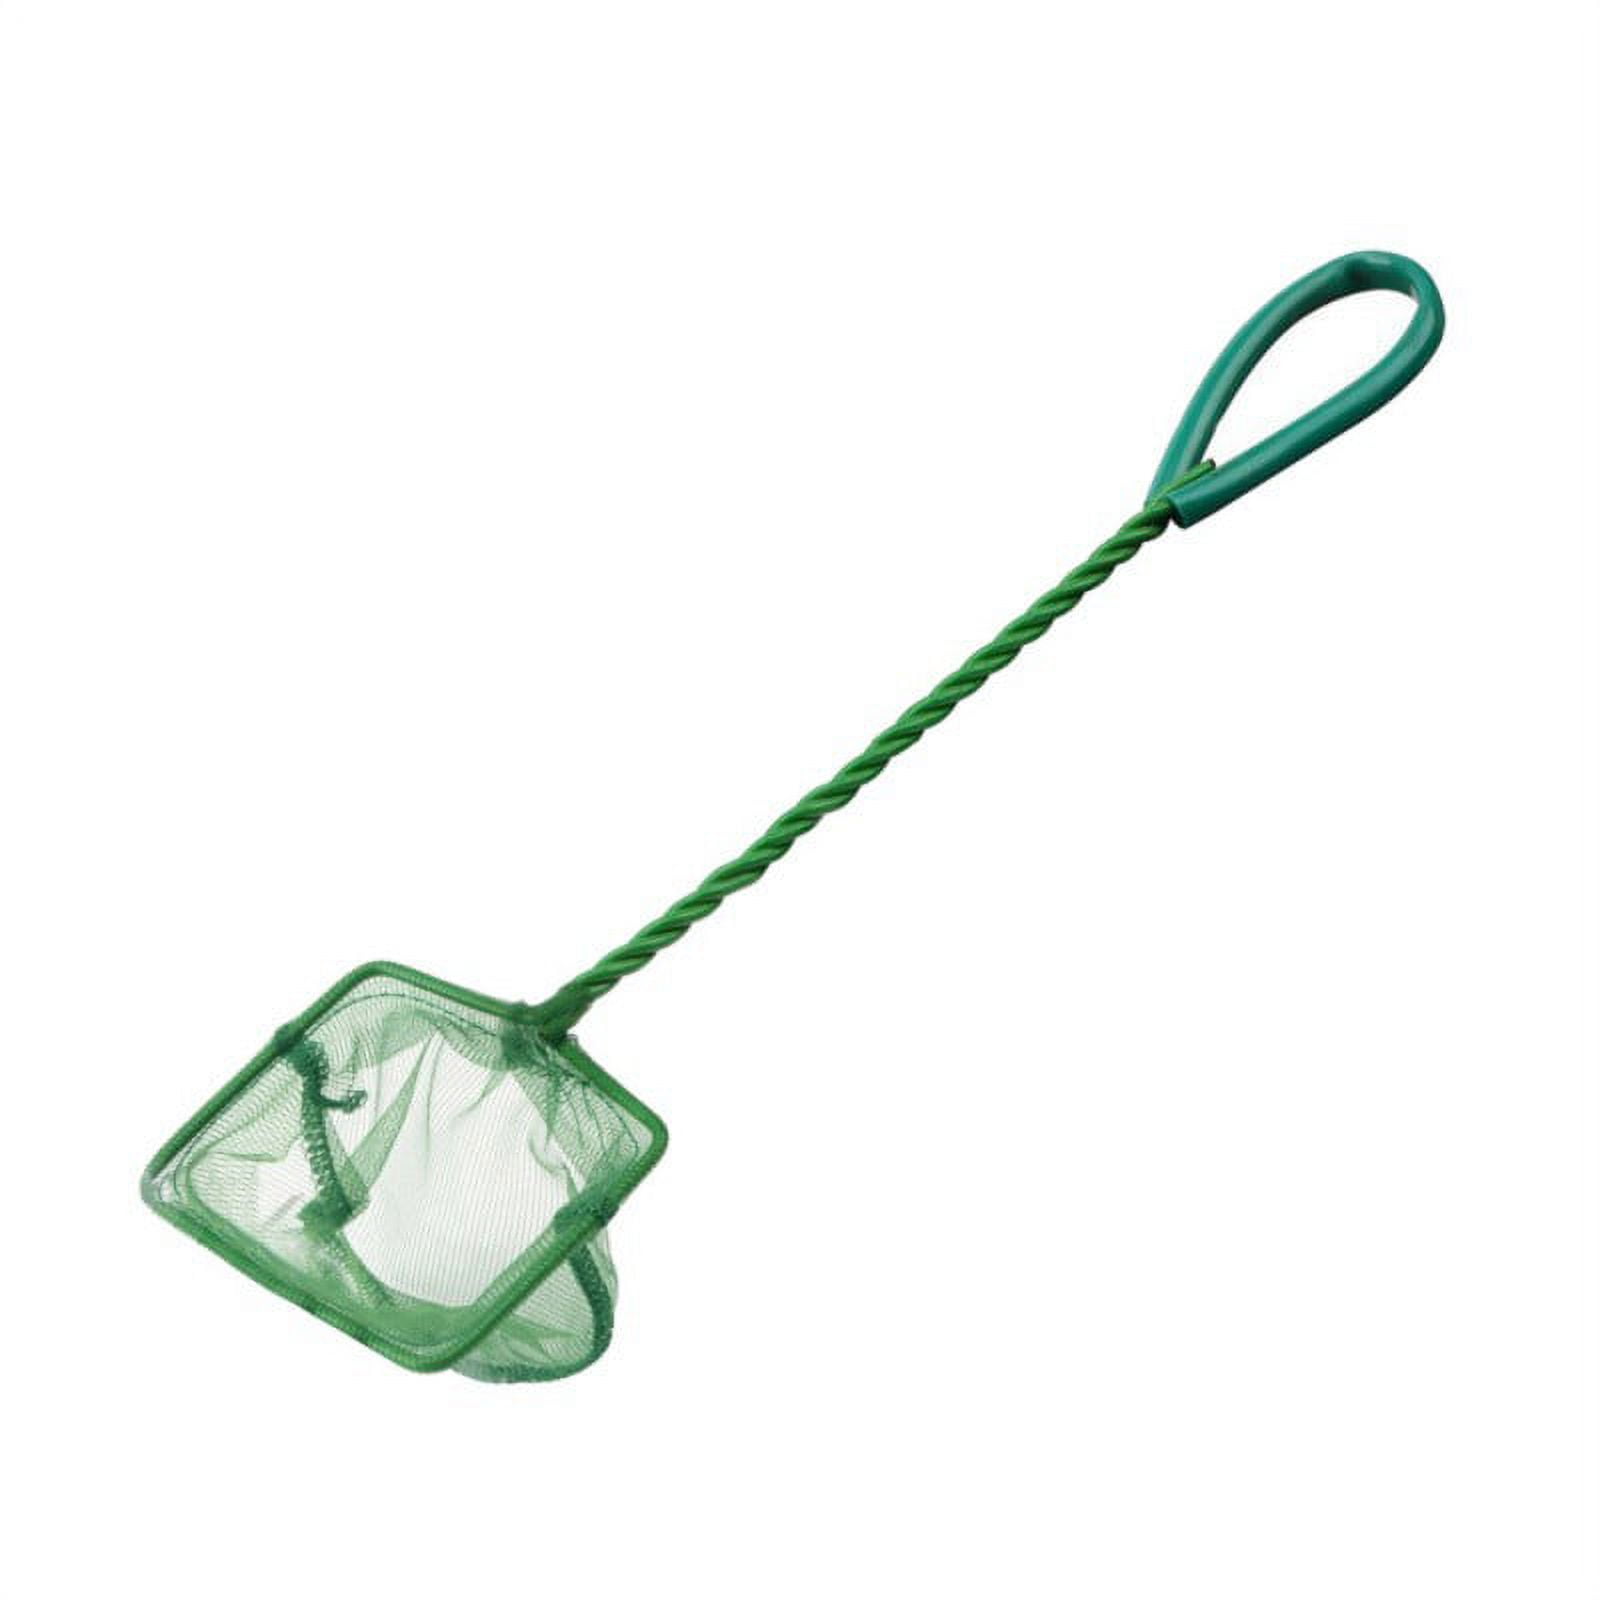 Fish Net for Fish Tank - Mesh Scooper with Extendable Handle up to Large  Scoop, Telescopic Pond Skimmer Nets for Cleaning Tanks - Aquarium  Accessories 